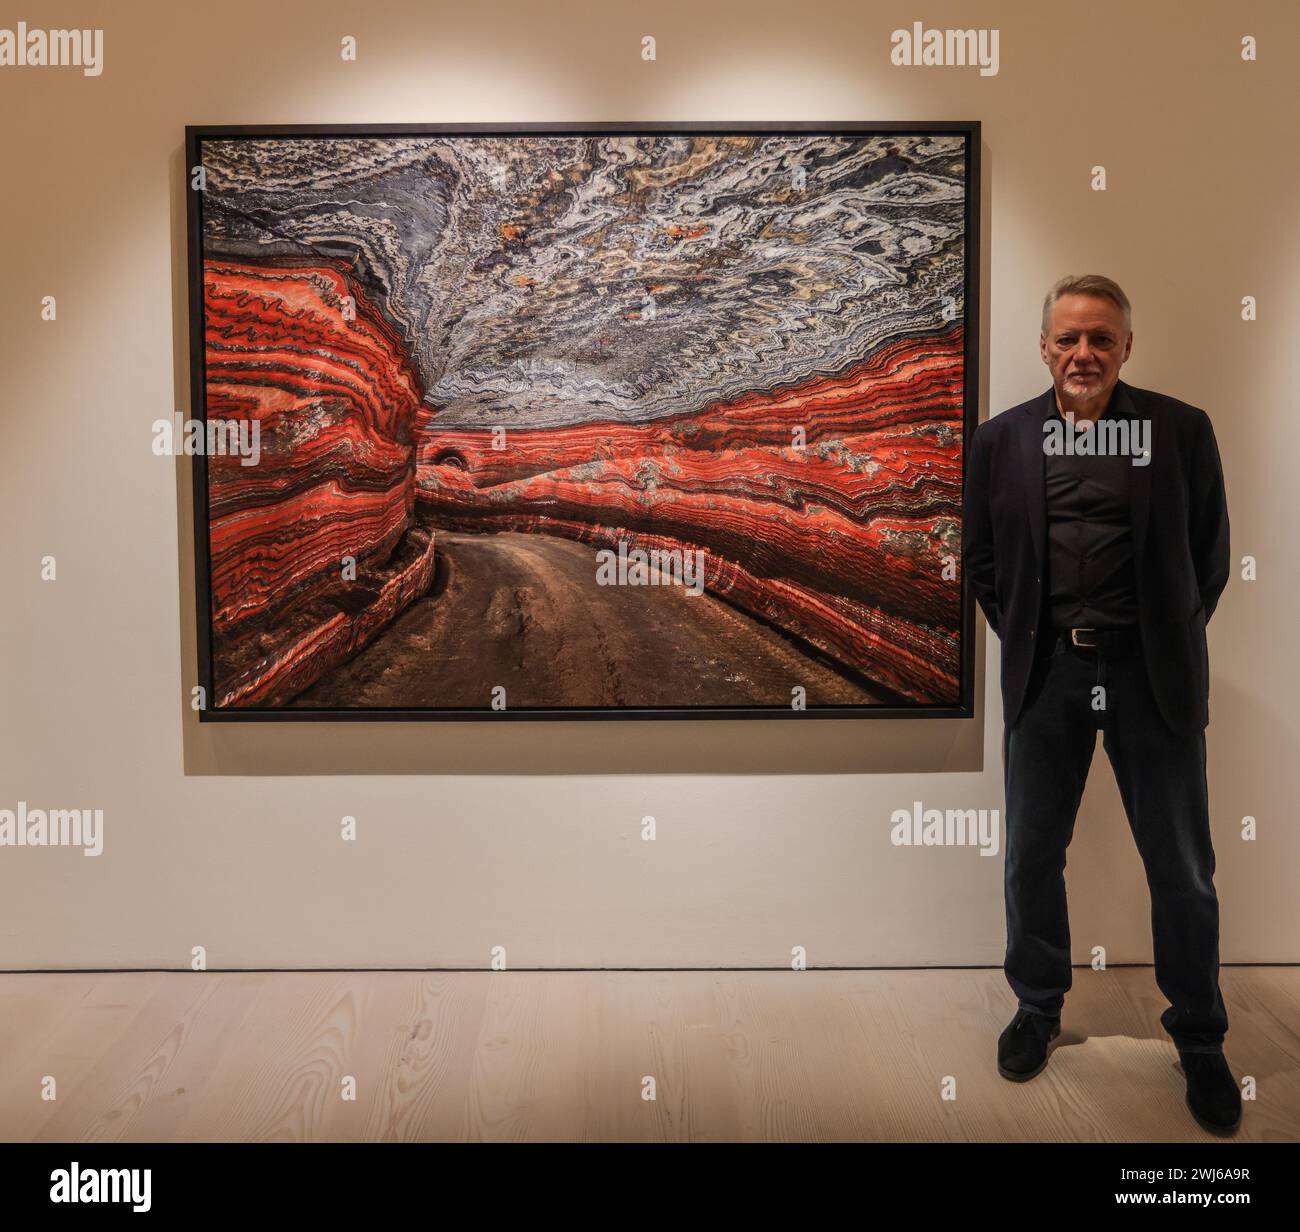 London, UK. 13th Feb, 2024. Edward Burtynsky (pictured) next to Uralkali Potash Mine # 2, Berezniki, Russia 2017.This exhibition marks the largest exhibition ever mounted in the 40  year career of world-renowned photographic artist, Edward Burtynsky, who has dedicated his practice to bearing witness to the impact of human industry on the planet.Paul Quezada-Neiman/Alamy Live News Credit: Paul Quezada-Neiman/Alamy Live News Stock Photo